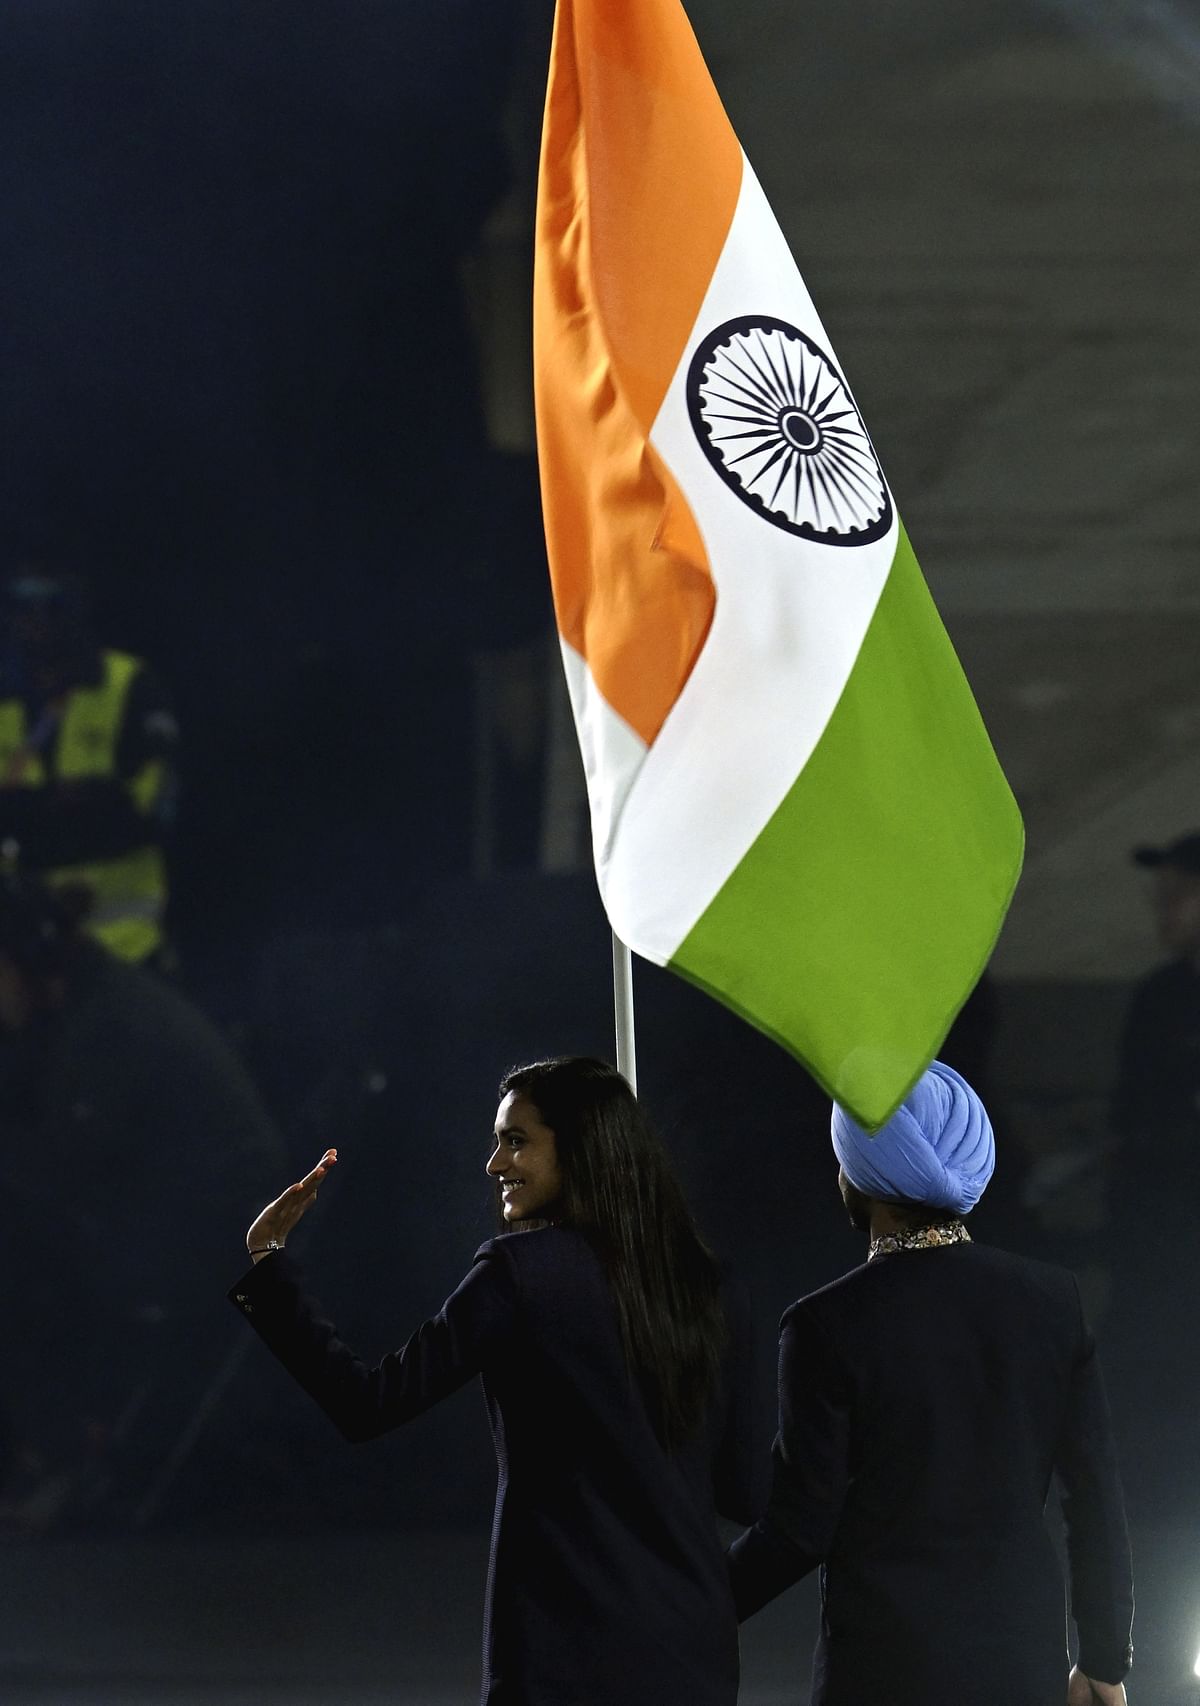 CWG 2022 got underway with a glittering Opening Ceremony on Thursday night. 